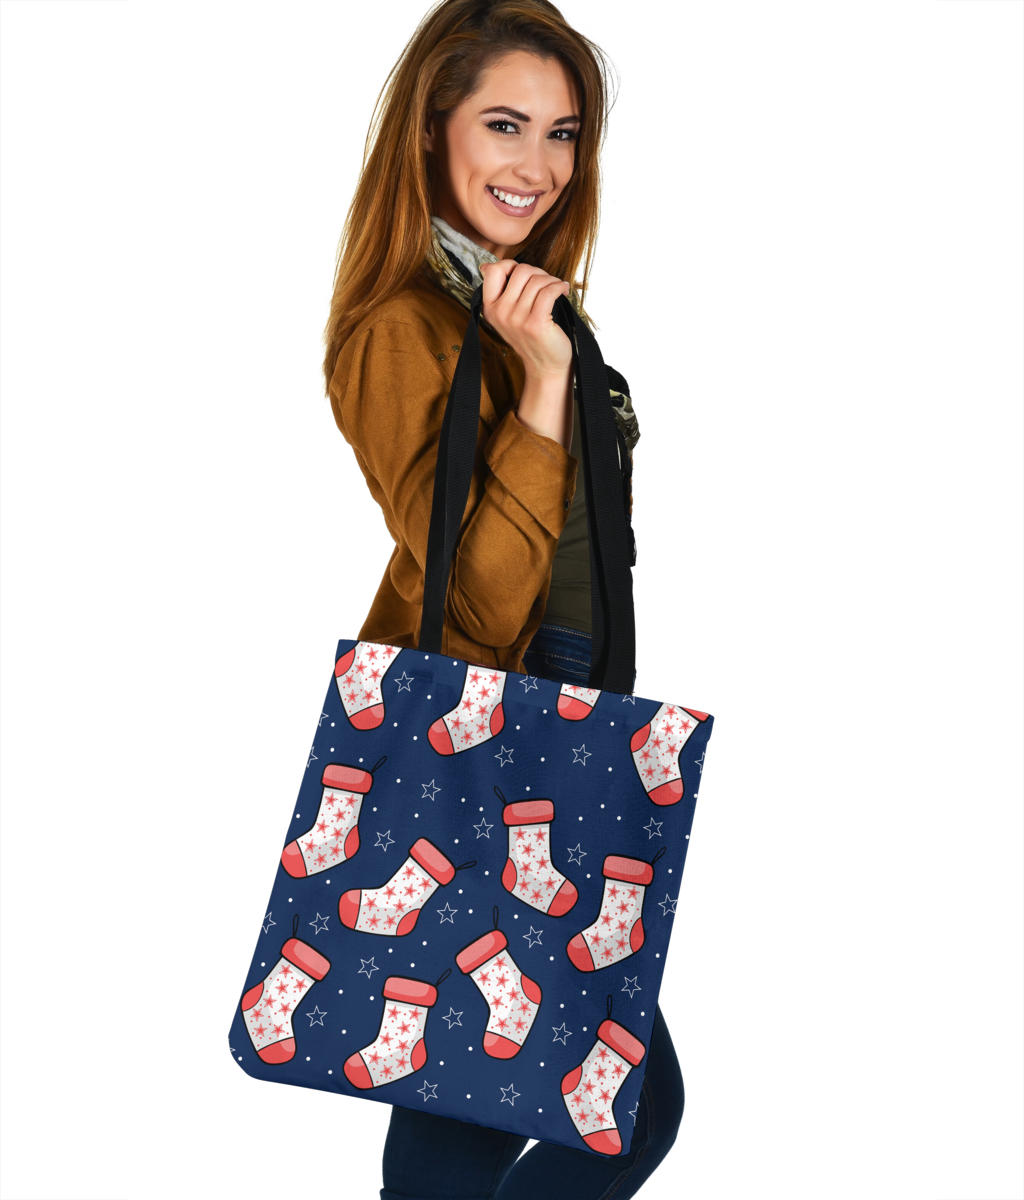 Blue And Red Stockings Linen Tote Bag